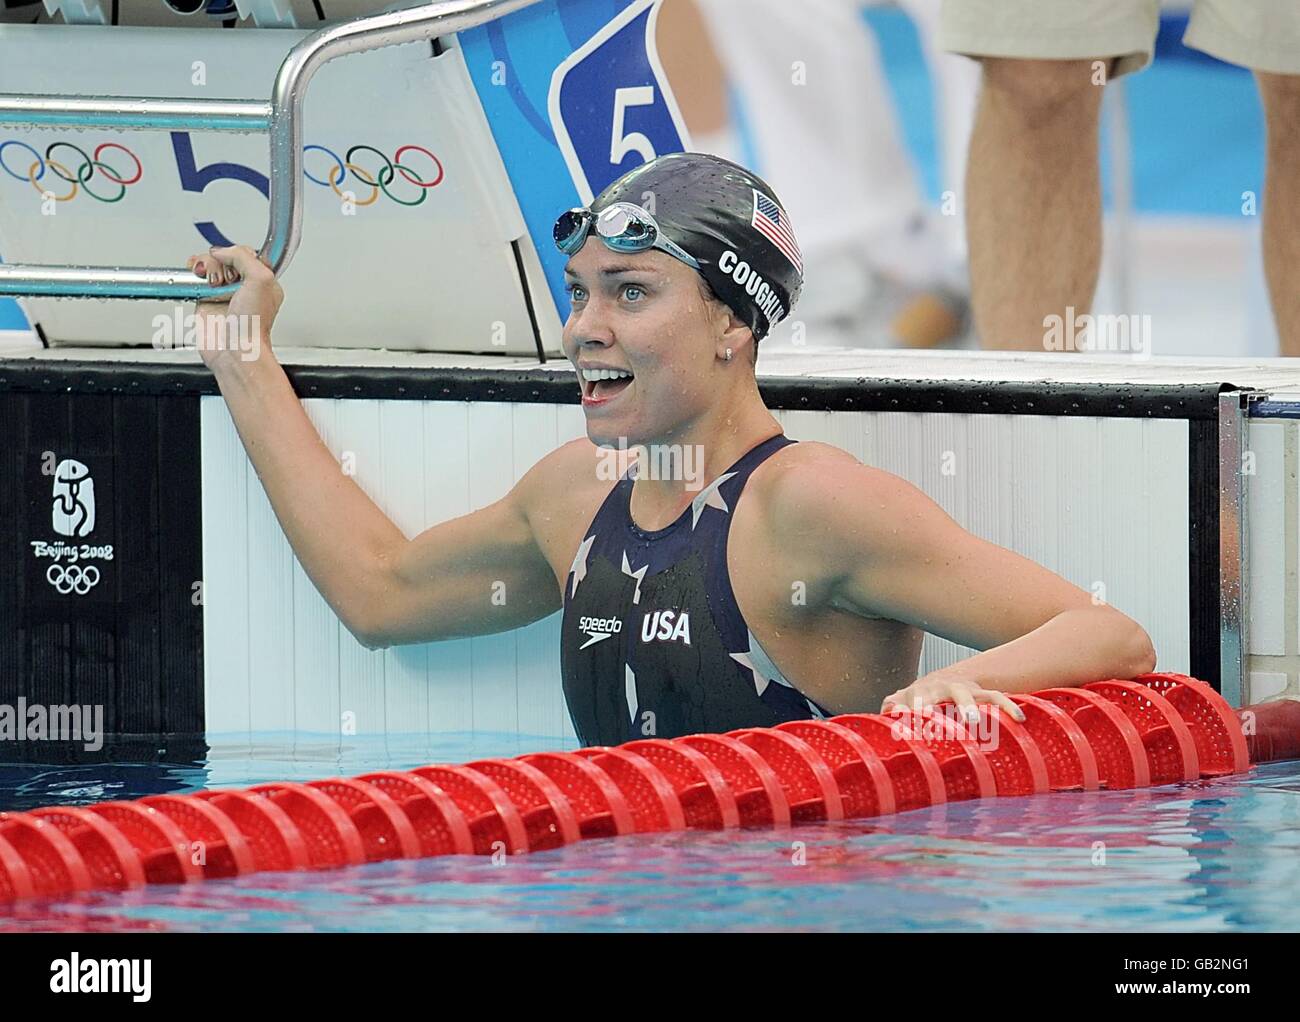 USA's Natalie Coughlin celebrates after winning the Women's 100m Backstroke Final during the 2008 Olympic Games in Beijing. Stock Photo